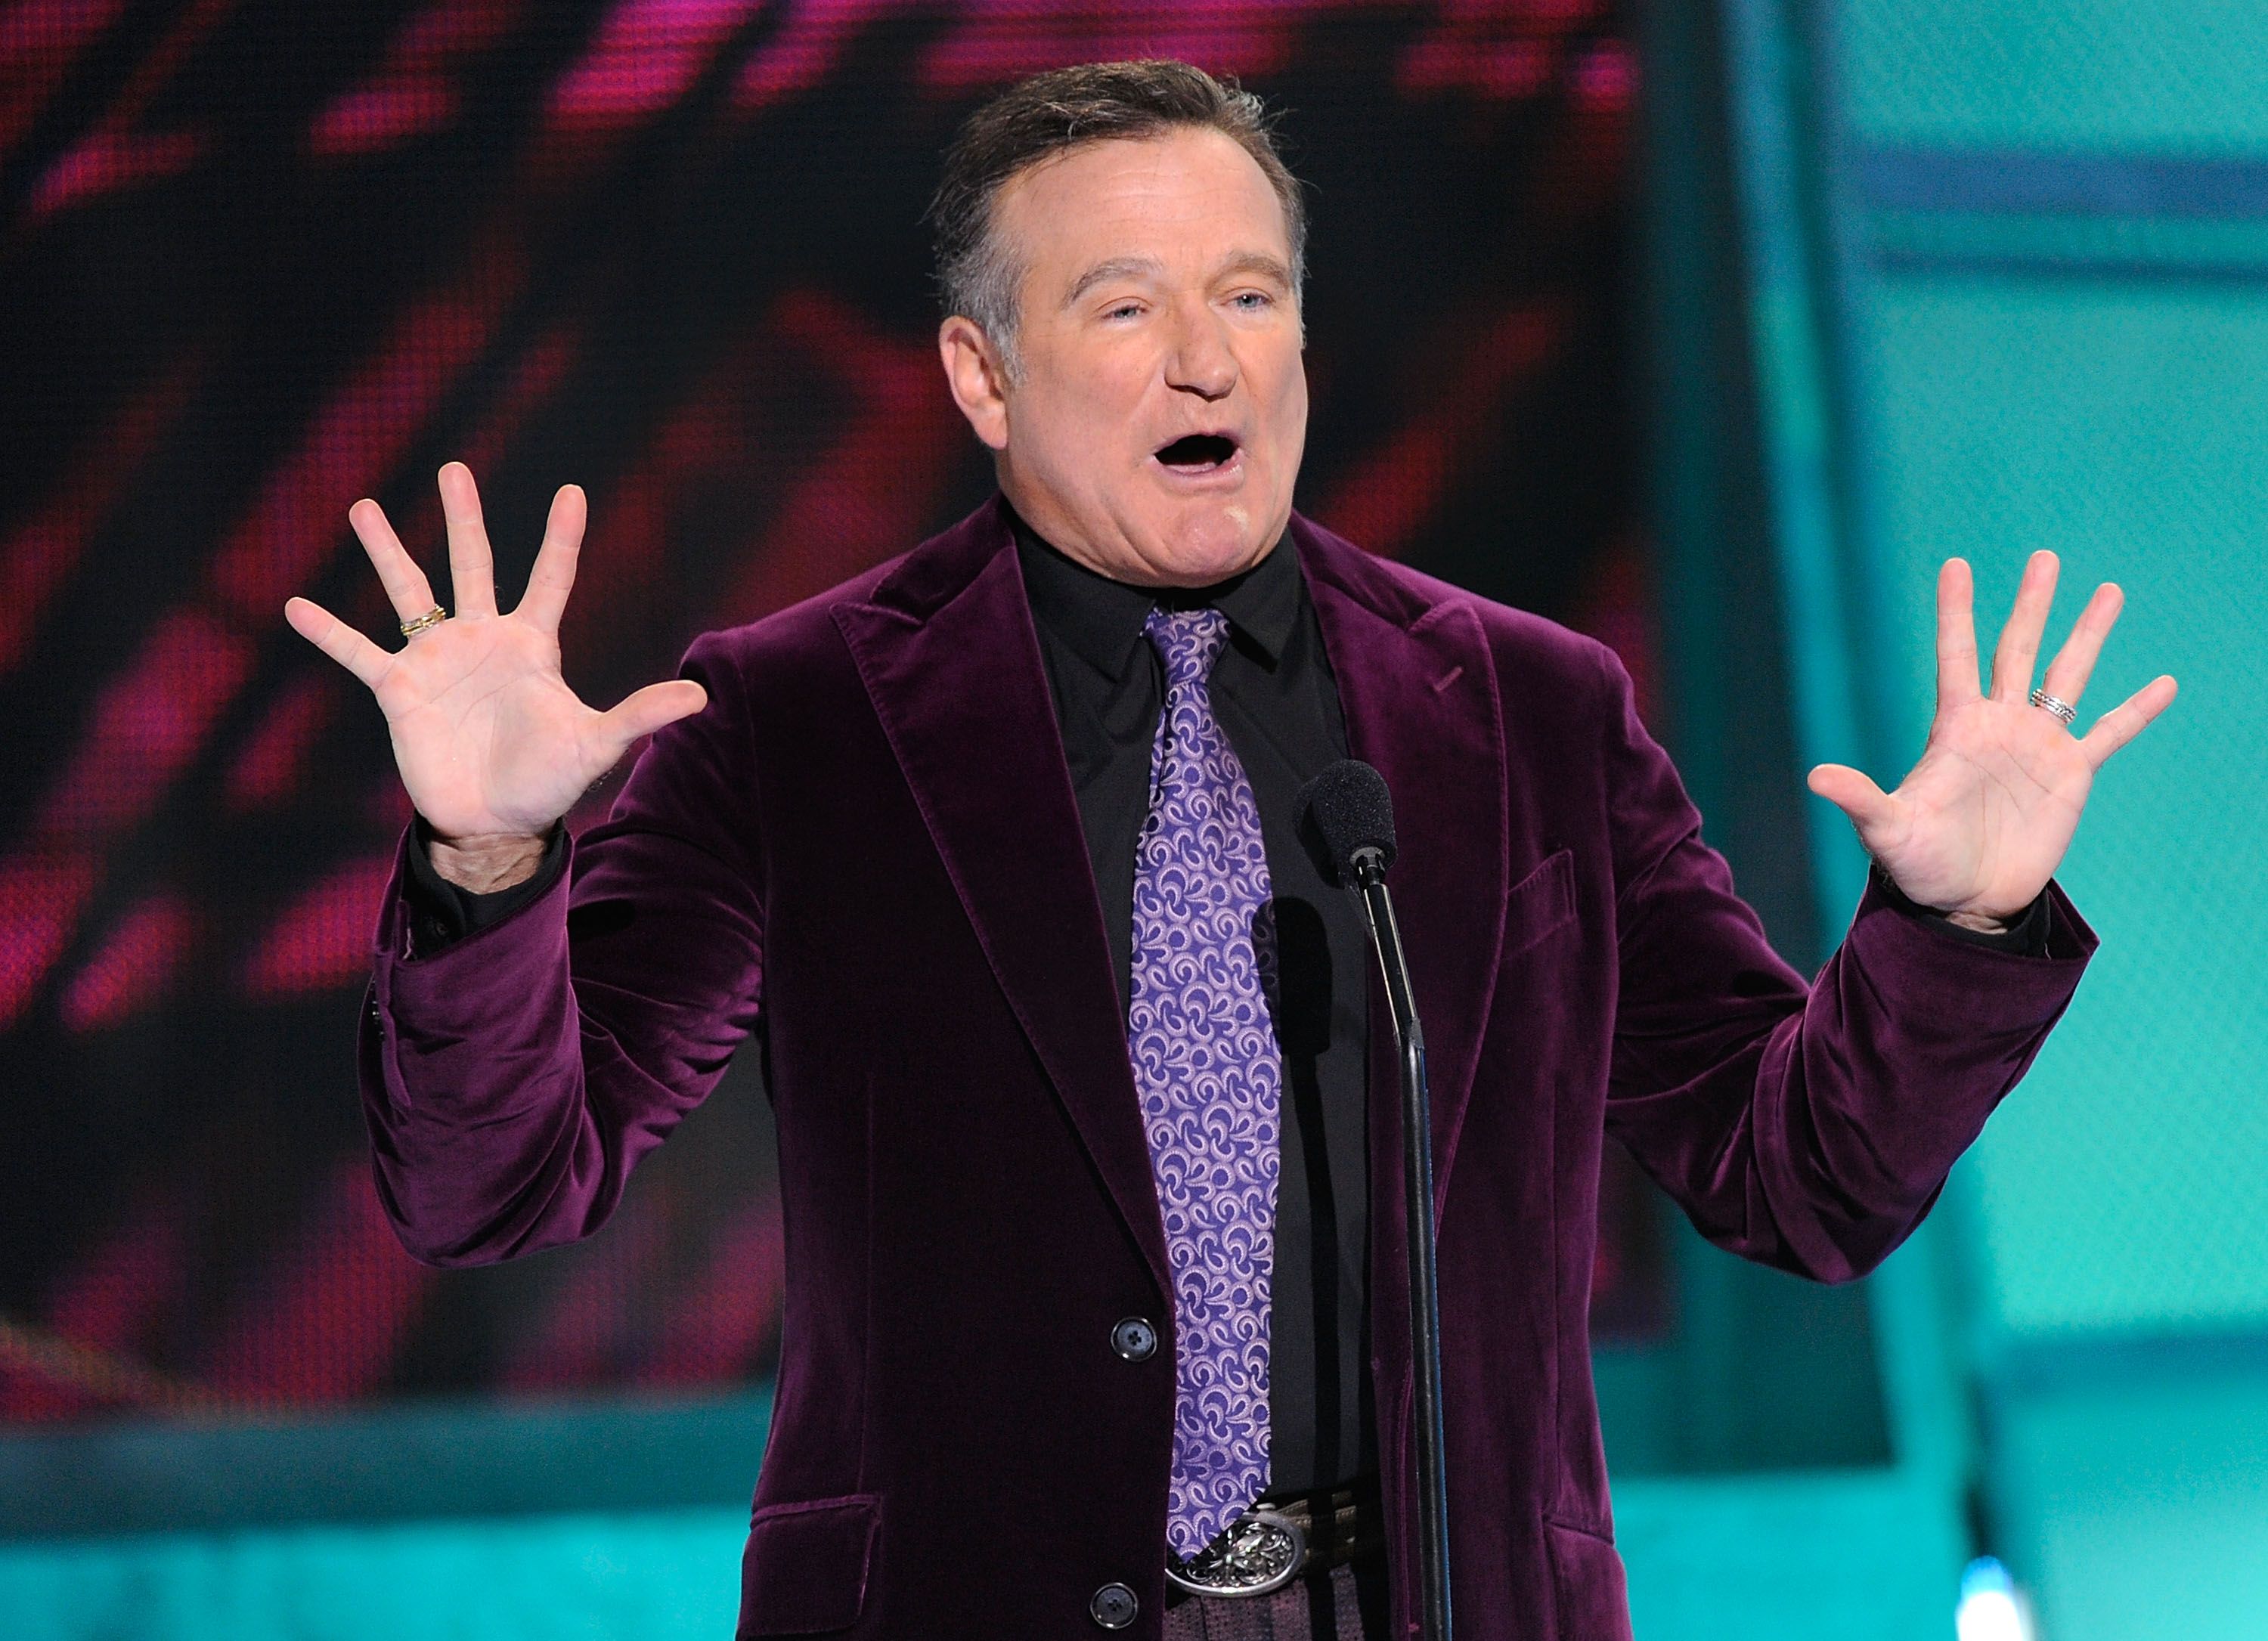 The late Robin Williams during the 35th Annual People's Choice Awards held at the Shrine Auditorium on January 7, 2009 in Los Angeles, California. | Photo: Getty Images